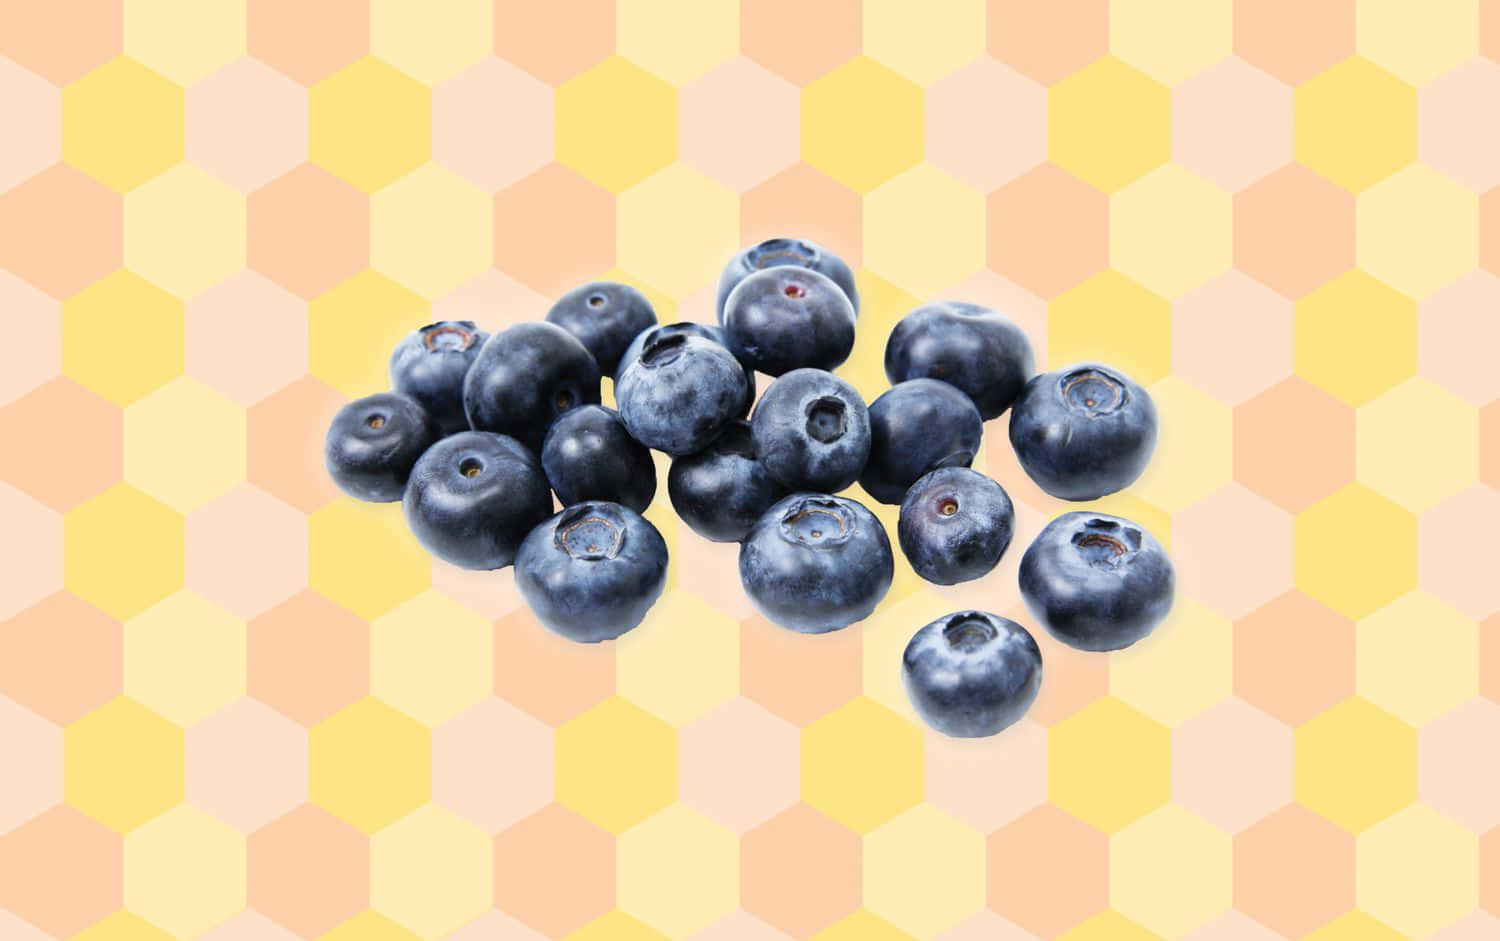 Refreshing Blueberries on a Summer's Day